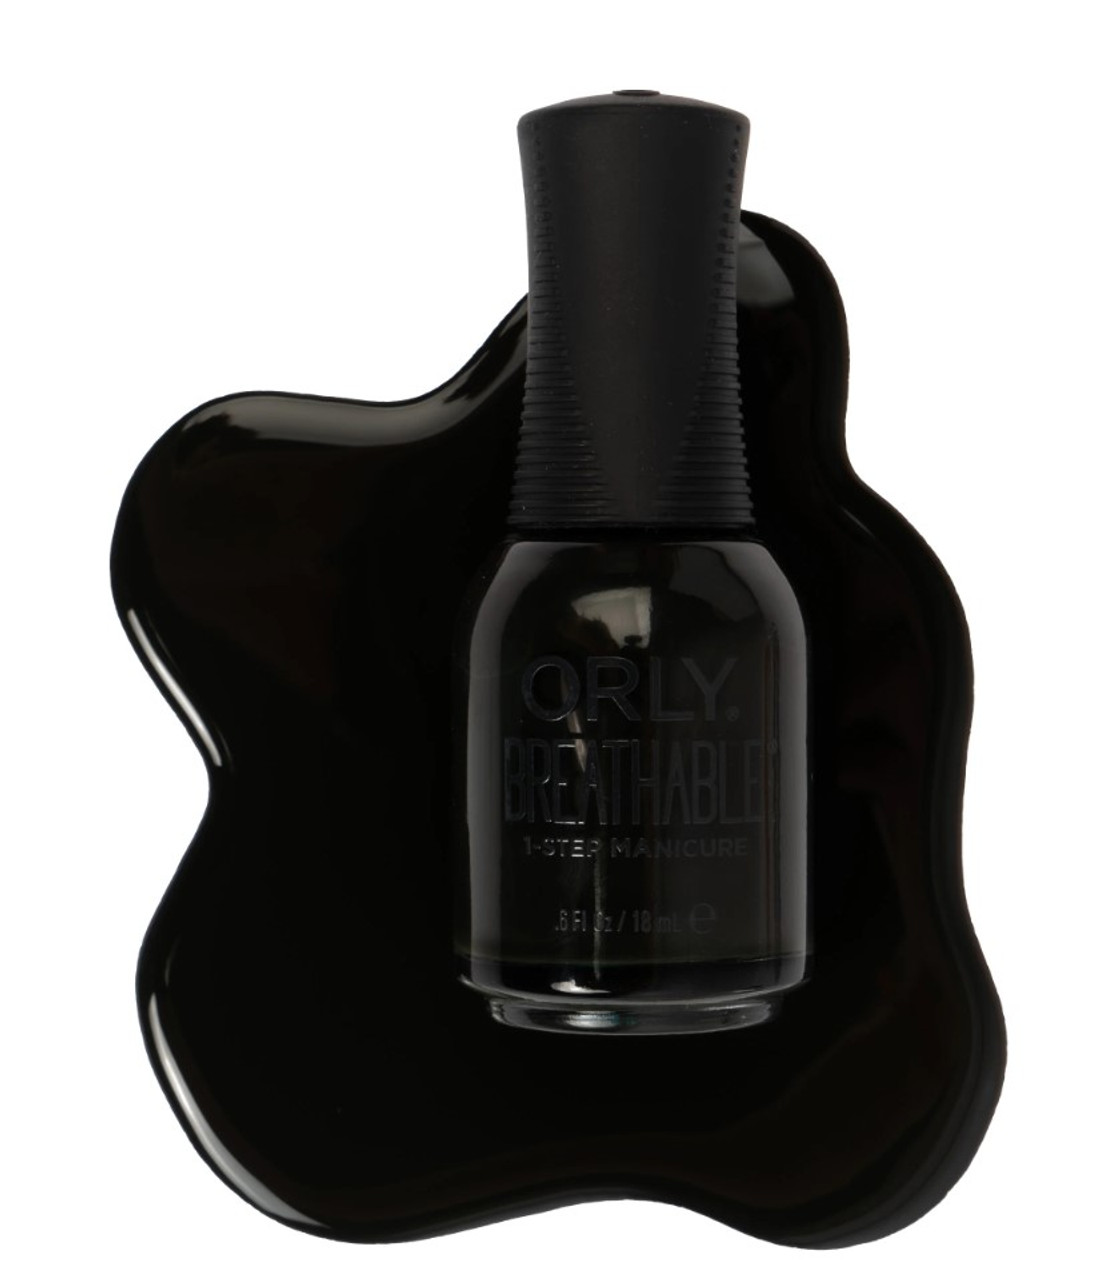 Orly Breathable Treatment + Color Back For S'more - .6 fl oz / 18 mL